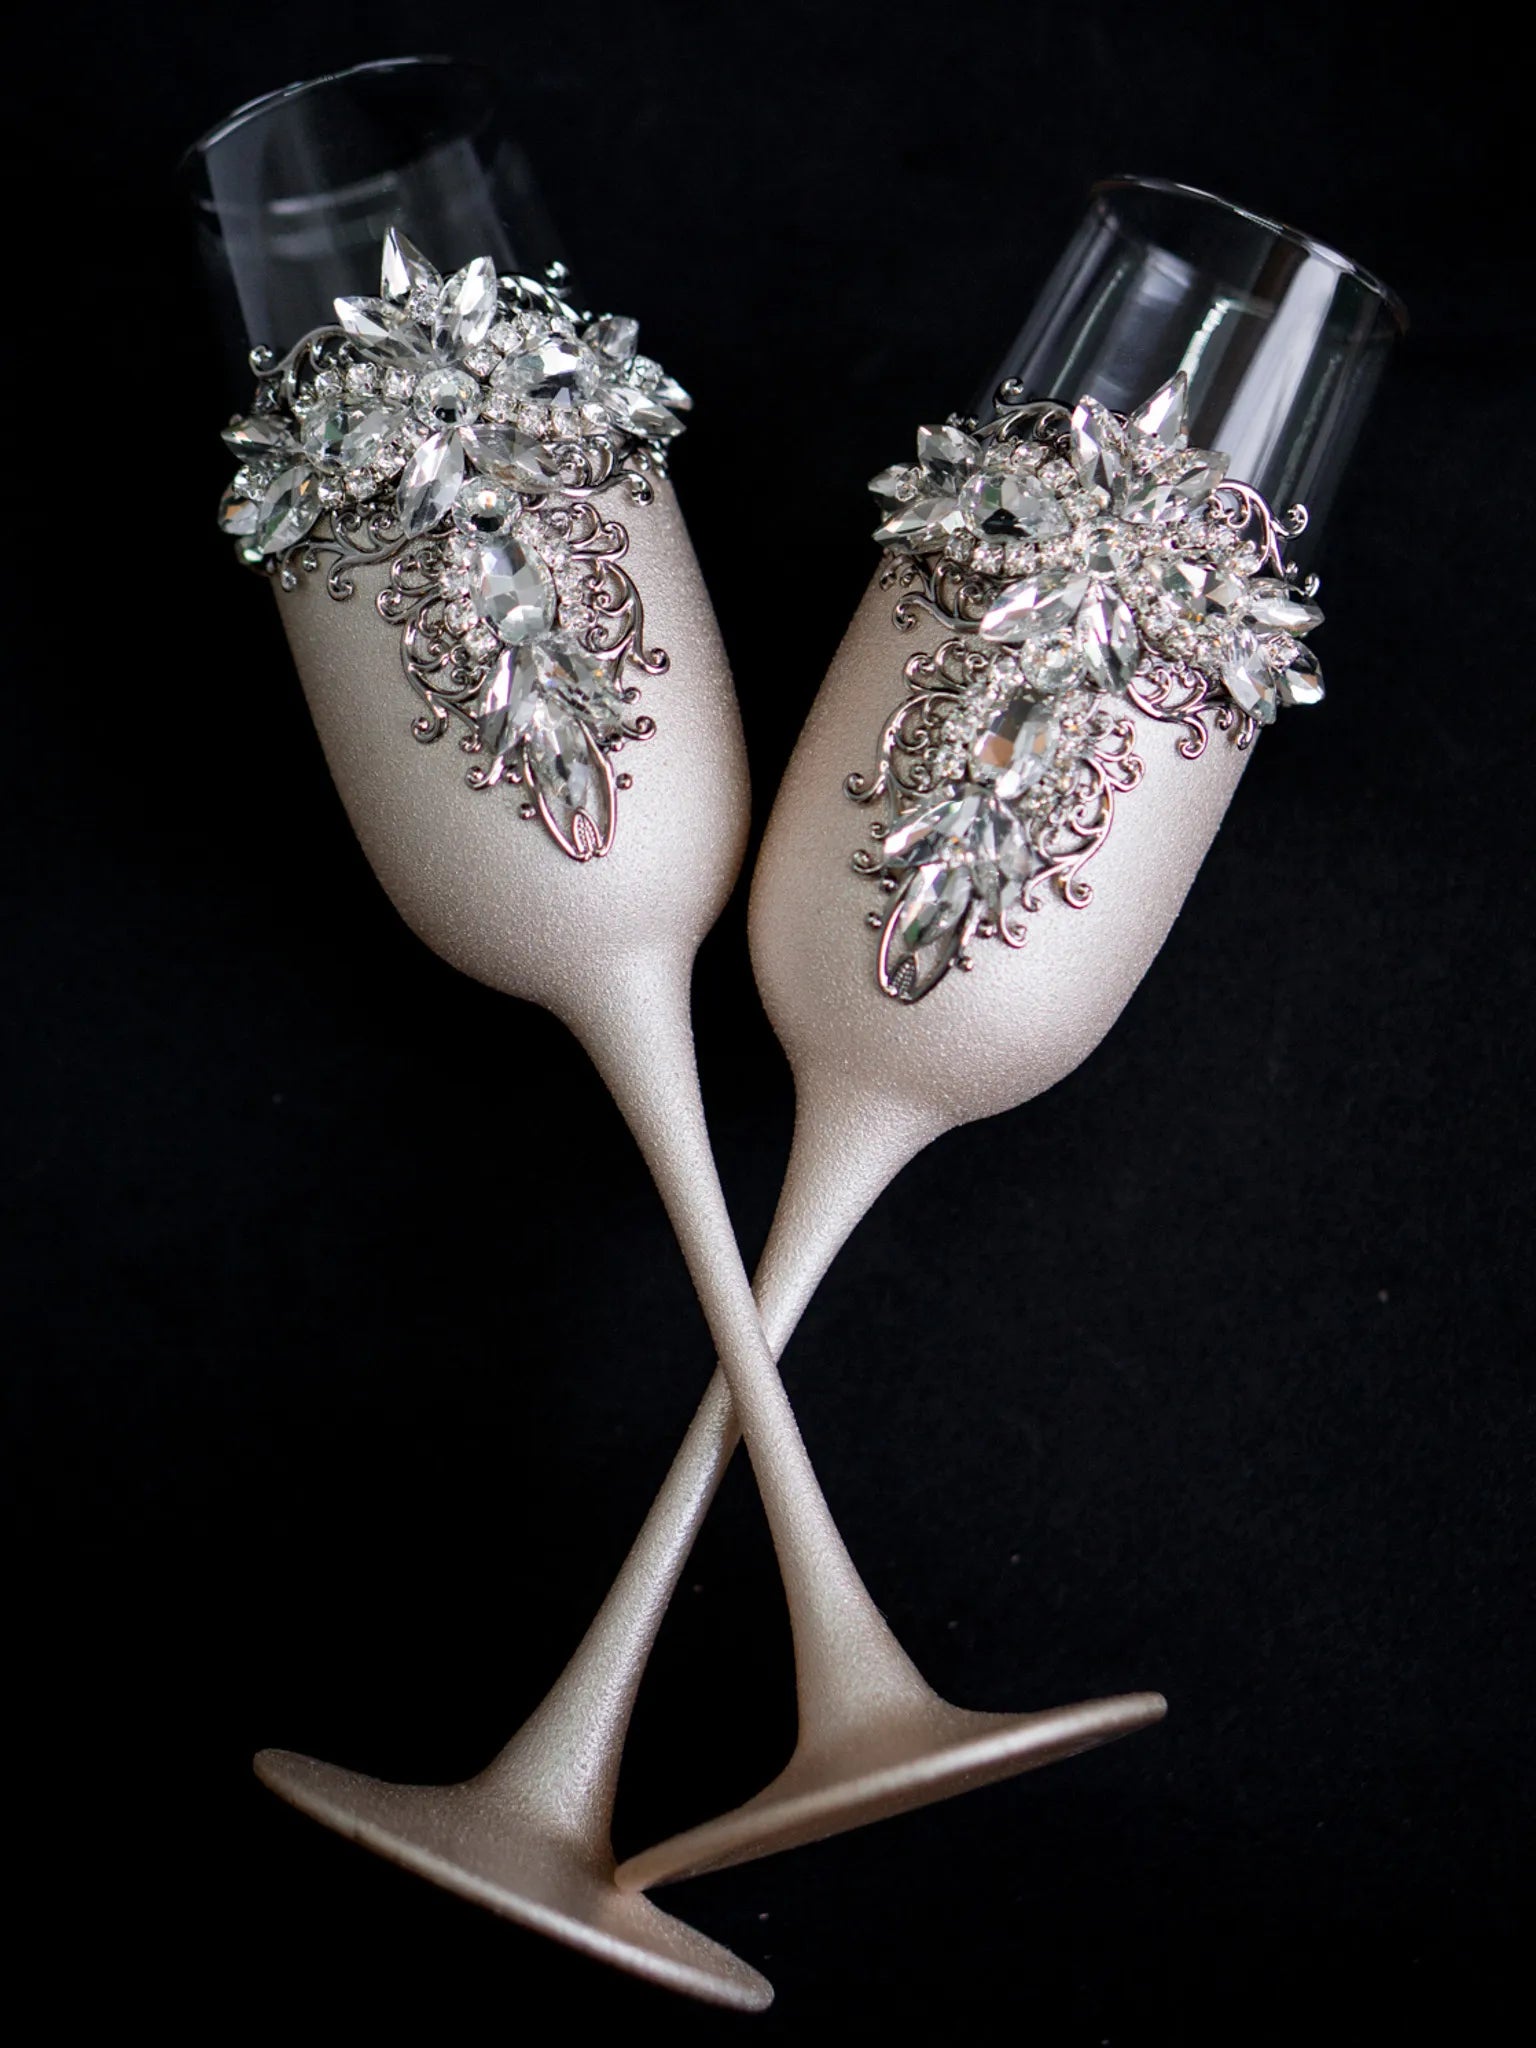 Customized Silver and Ivory Champagne Glasses and Cake Serving Kit